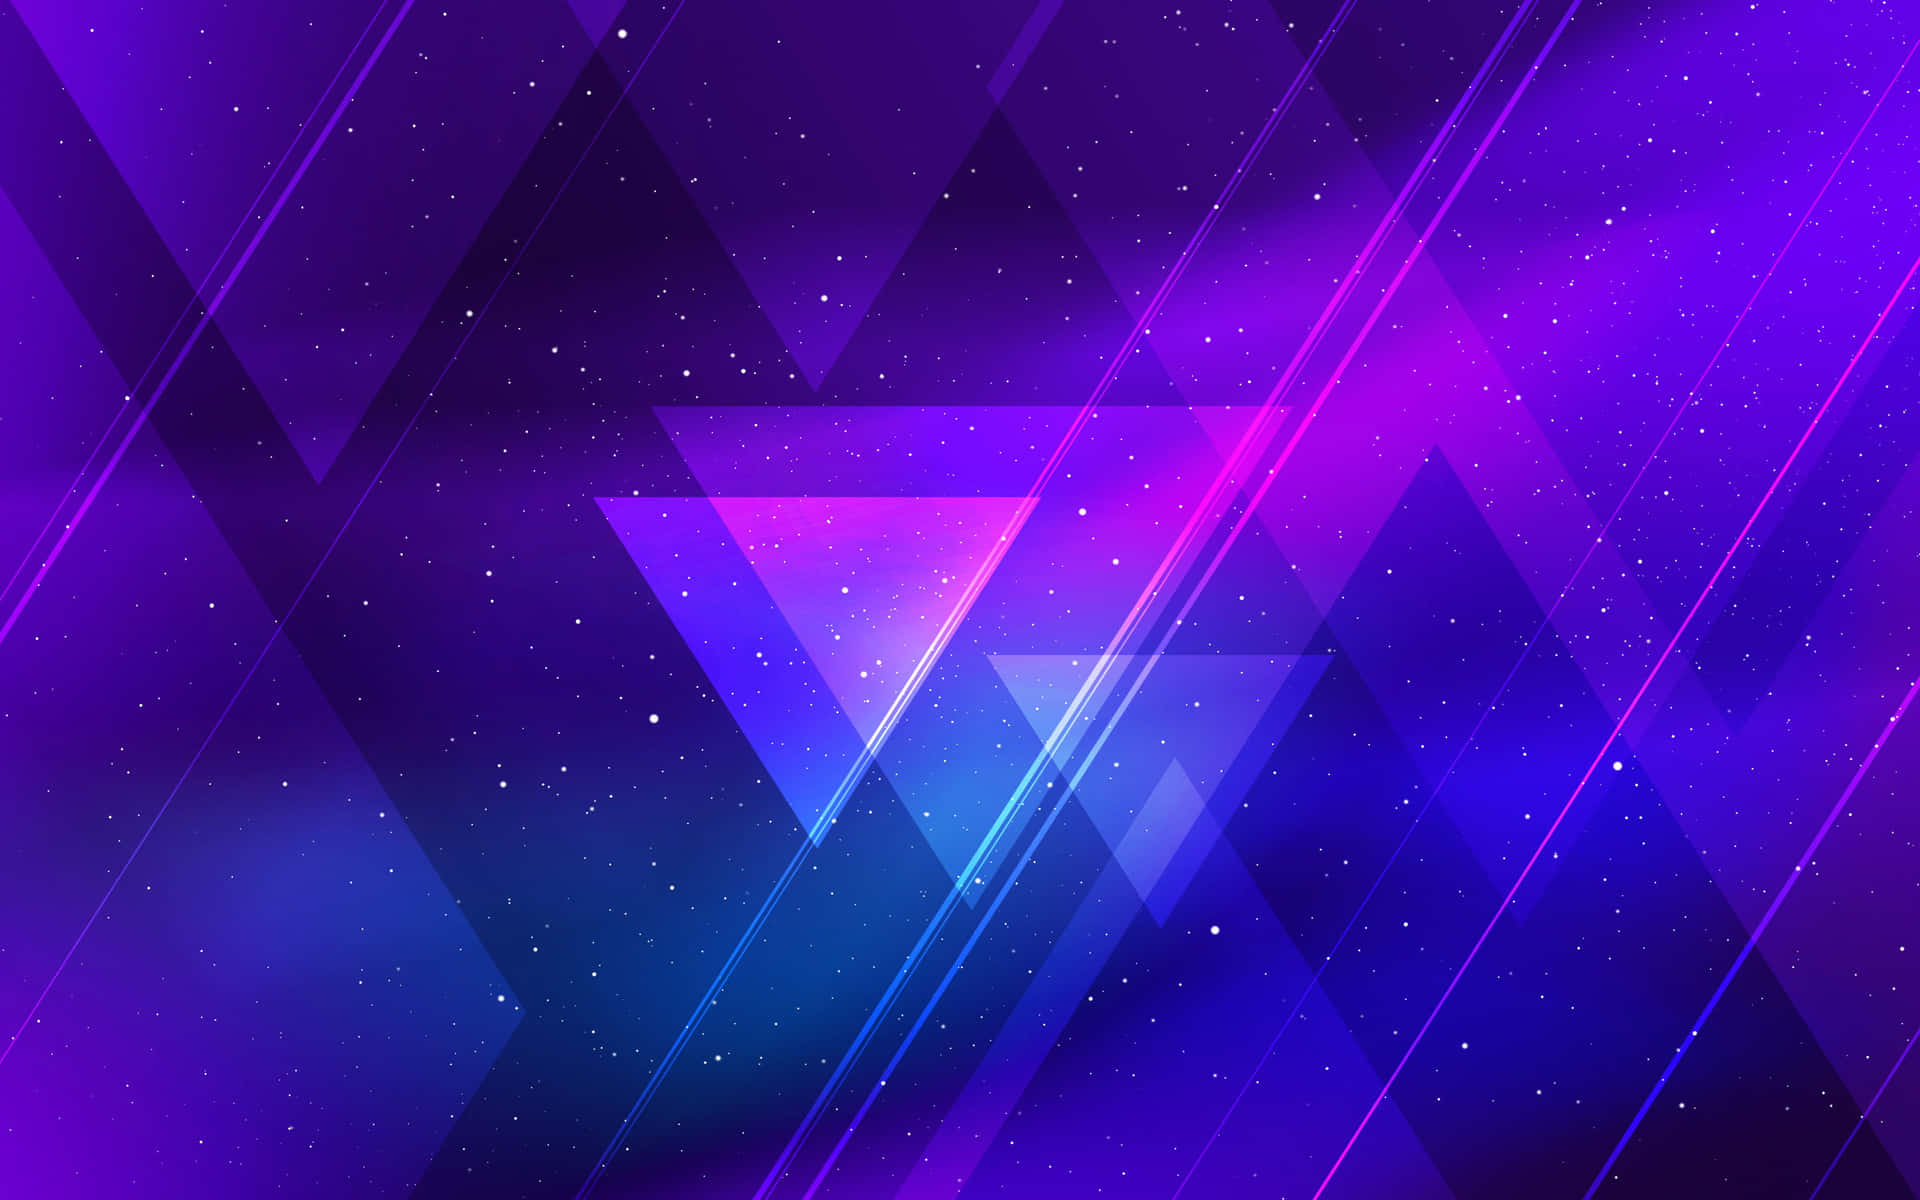 A Neon Purple Aesthetic that Creates a Sense of Ambiance